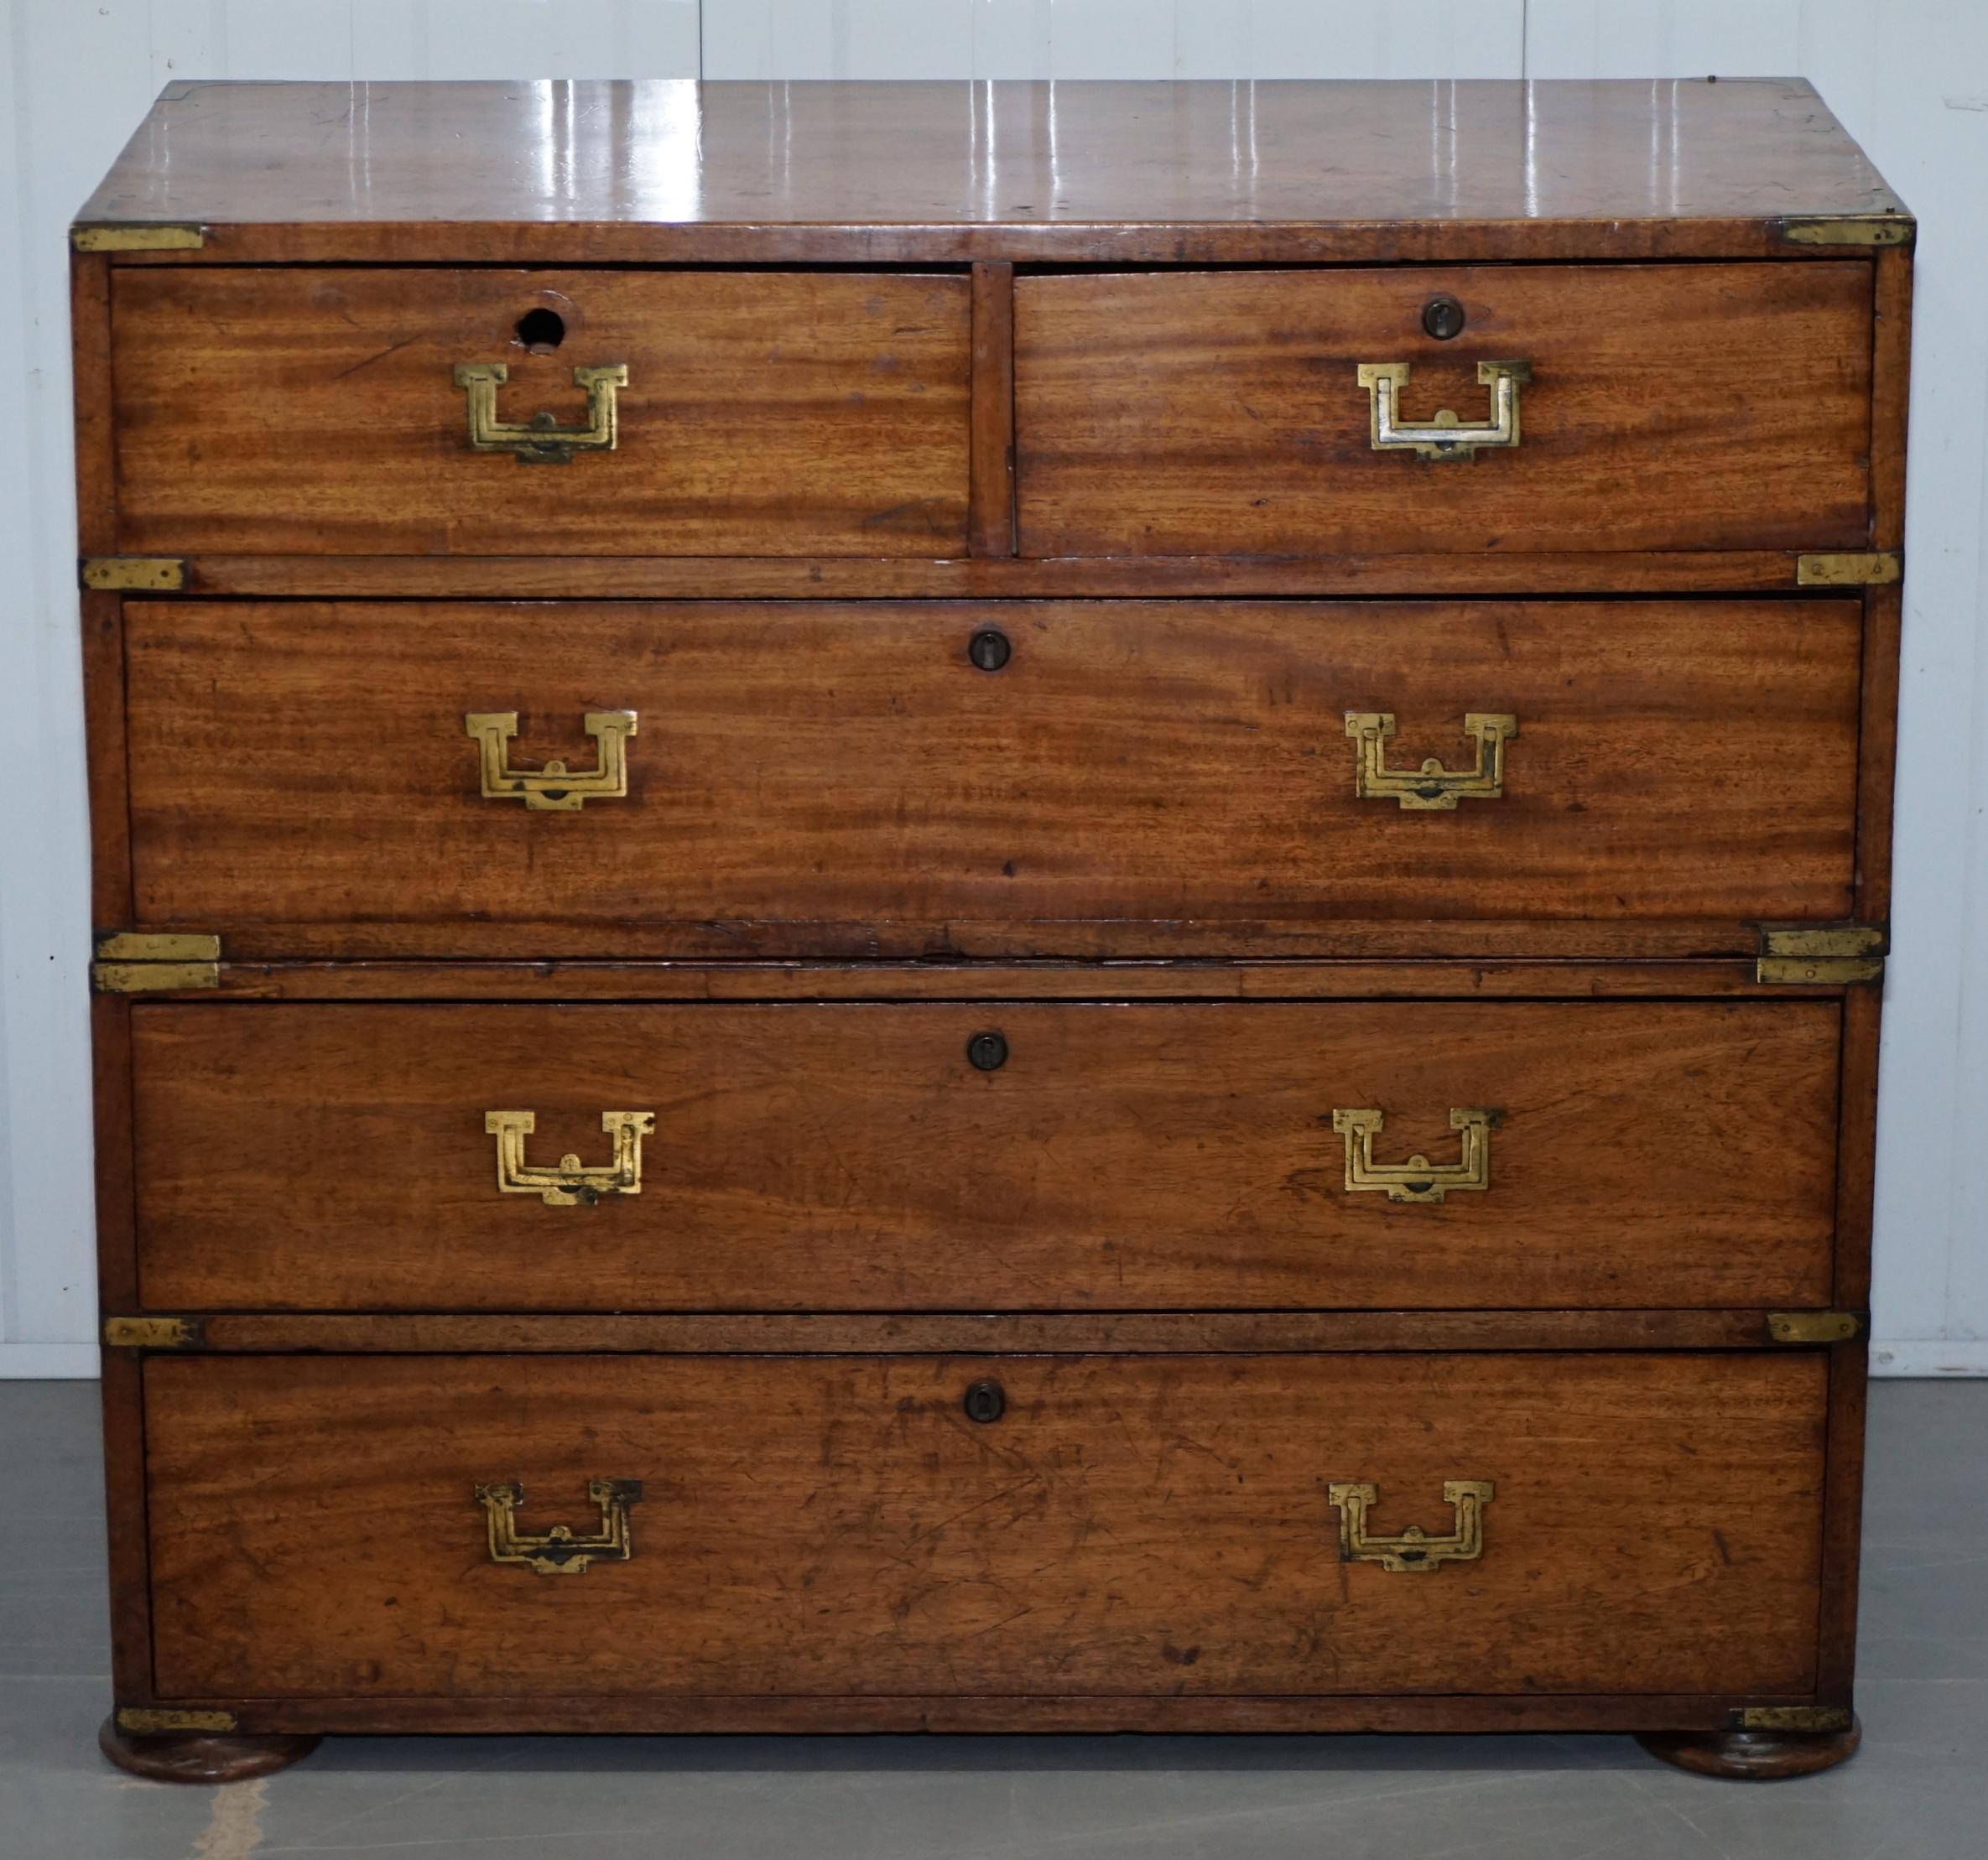 Wimbledon-Furniture

Wimbledon-Furniture is delighted to offer for sale this lovely very rare Military officers Campaign Chest of drawers with the original paper label dated 10th February 1813 which puts this piece in the Napoleonic war era

Please